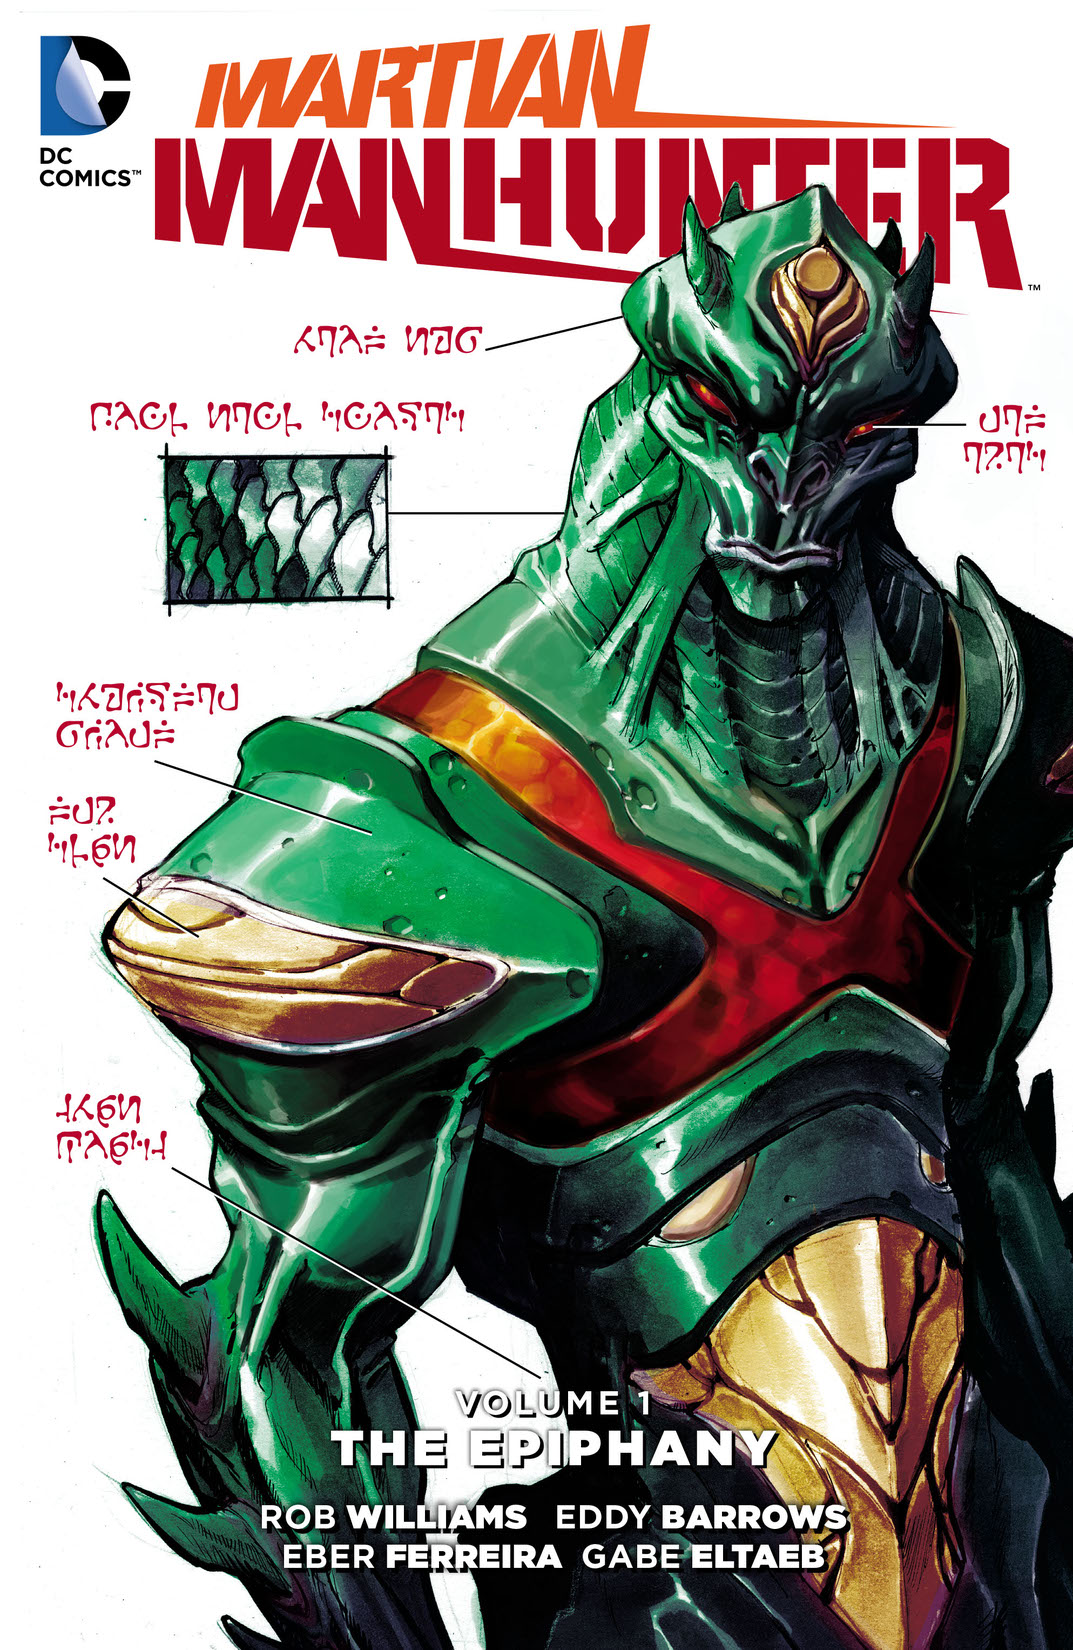 Martian Manhunter Vol. 1: The Epiphany preview images